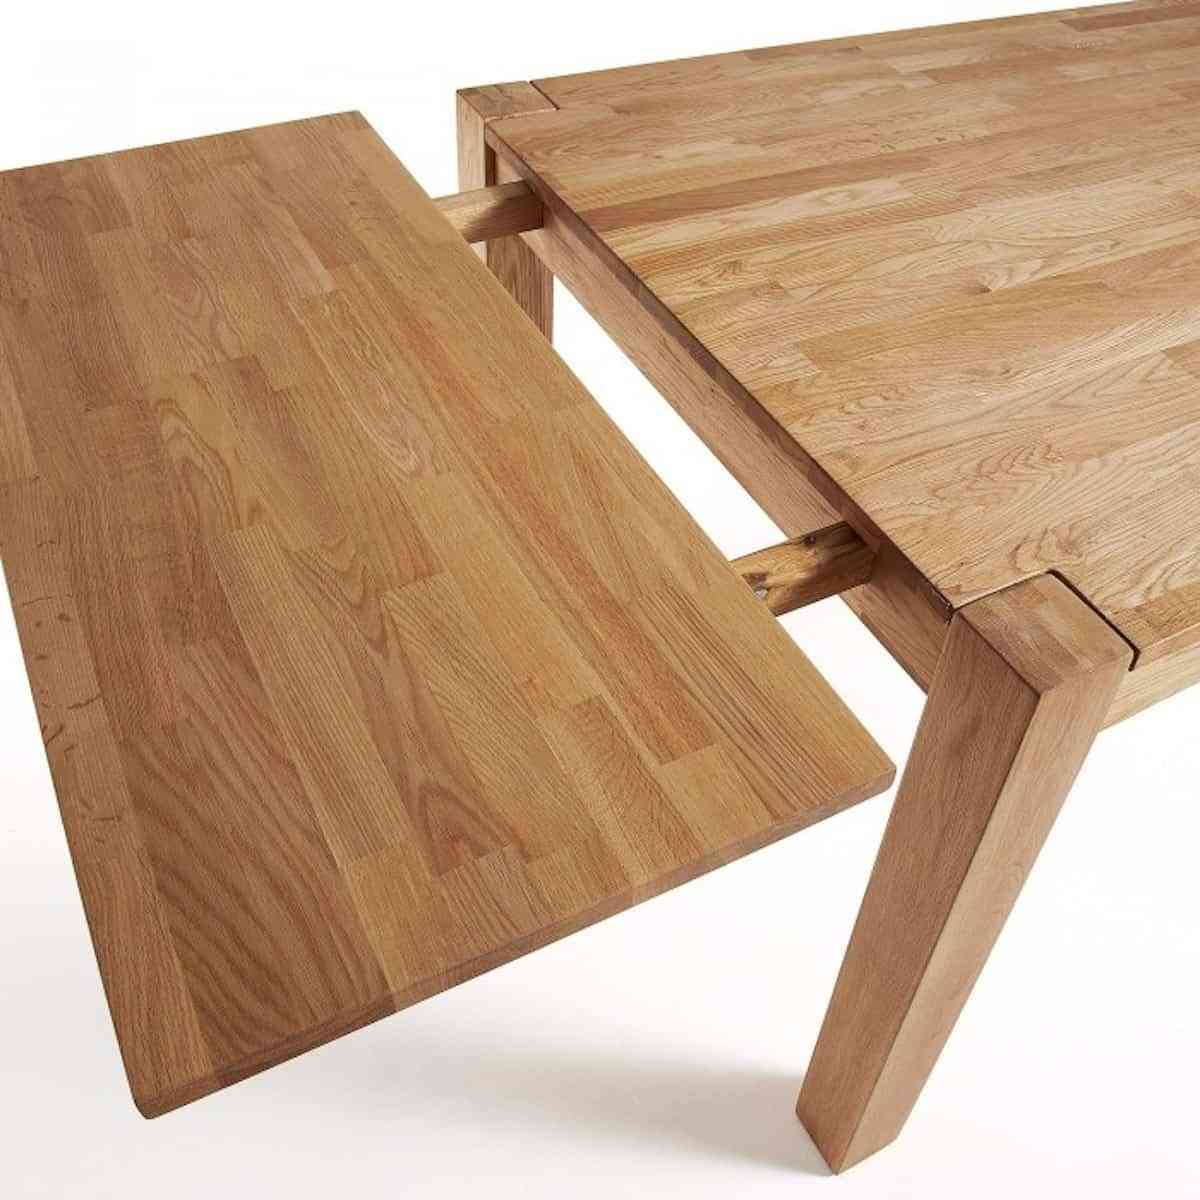 Mesa Extensible. Fuente: Kavehome